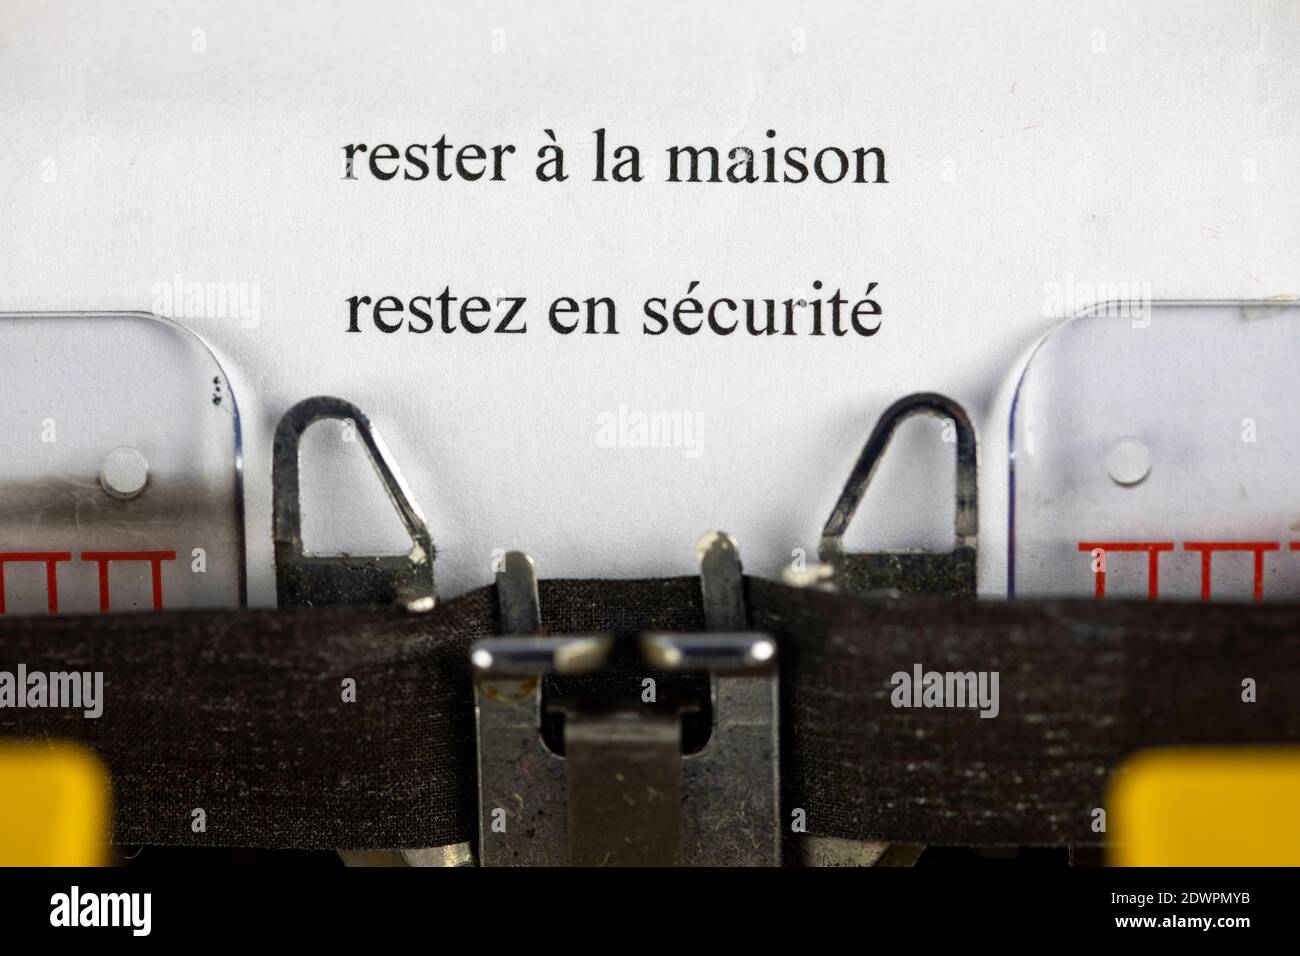 rester à la maison, restez en securite ( stay home, stay safe) written on an old typewriter Stock Photo